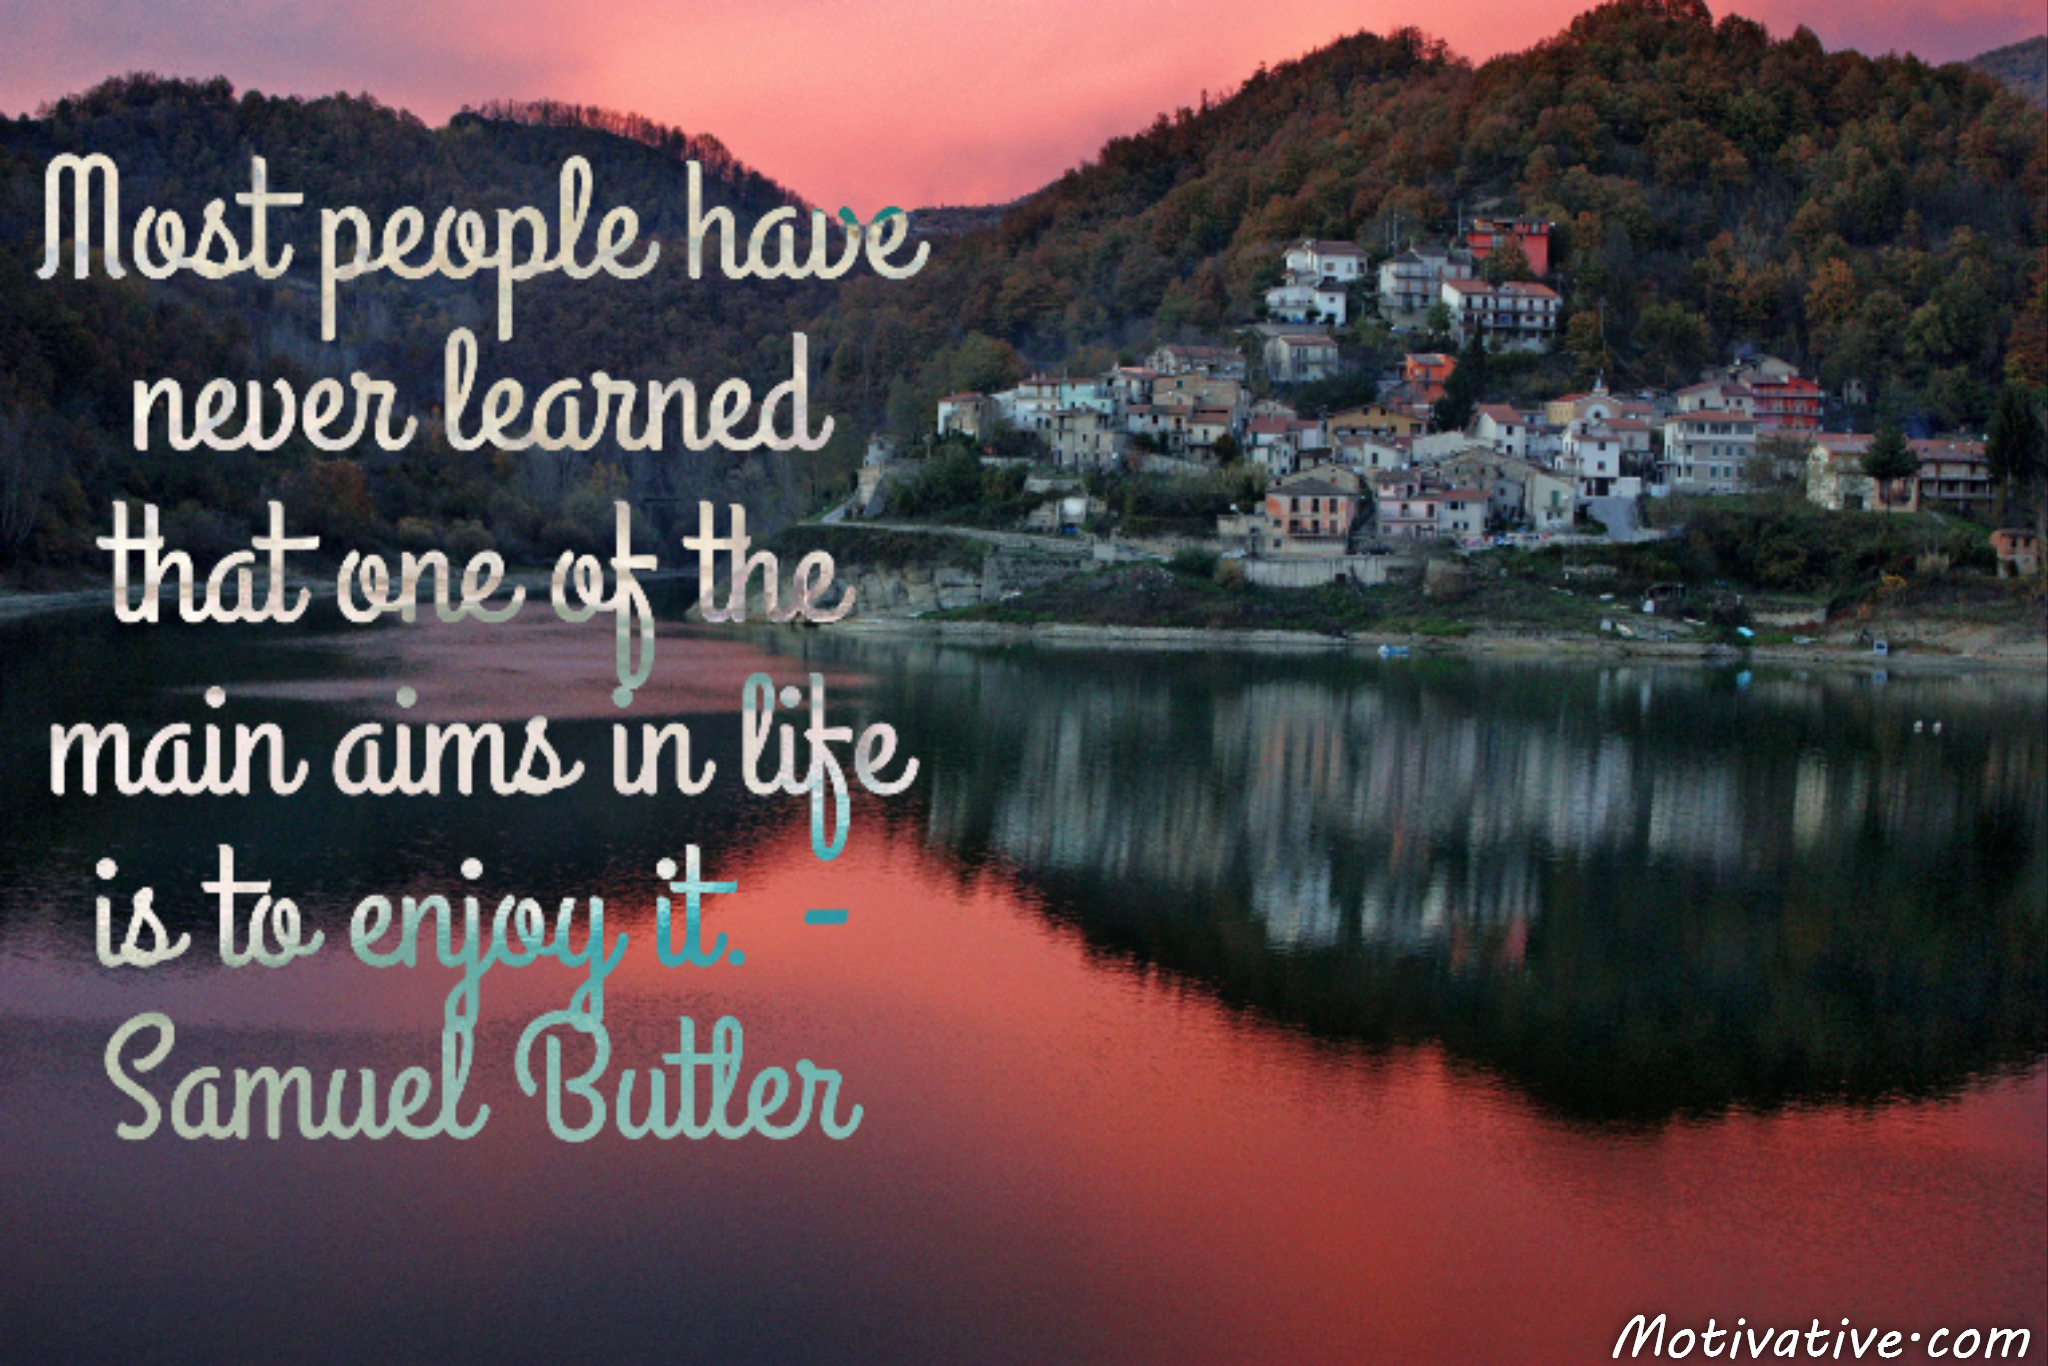 Most people have never learned that one of the main aims in life is to enjoy it. – Samuel Butler